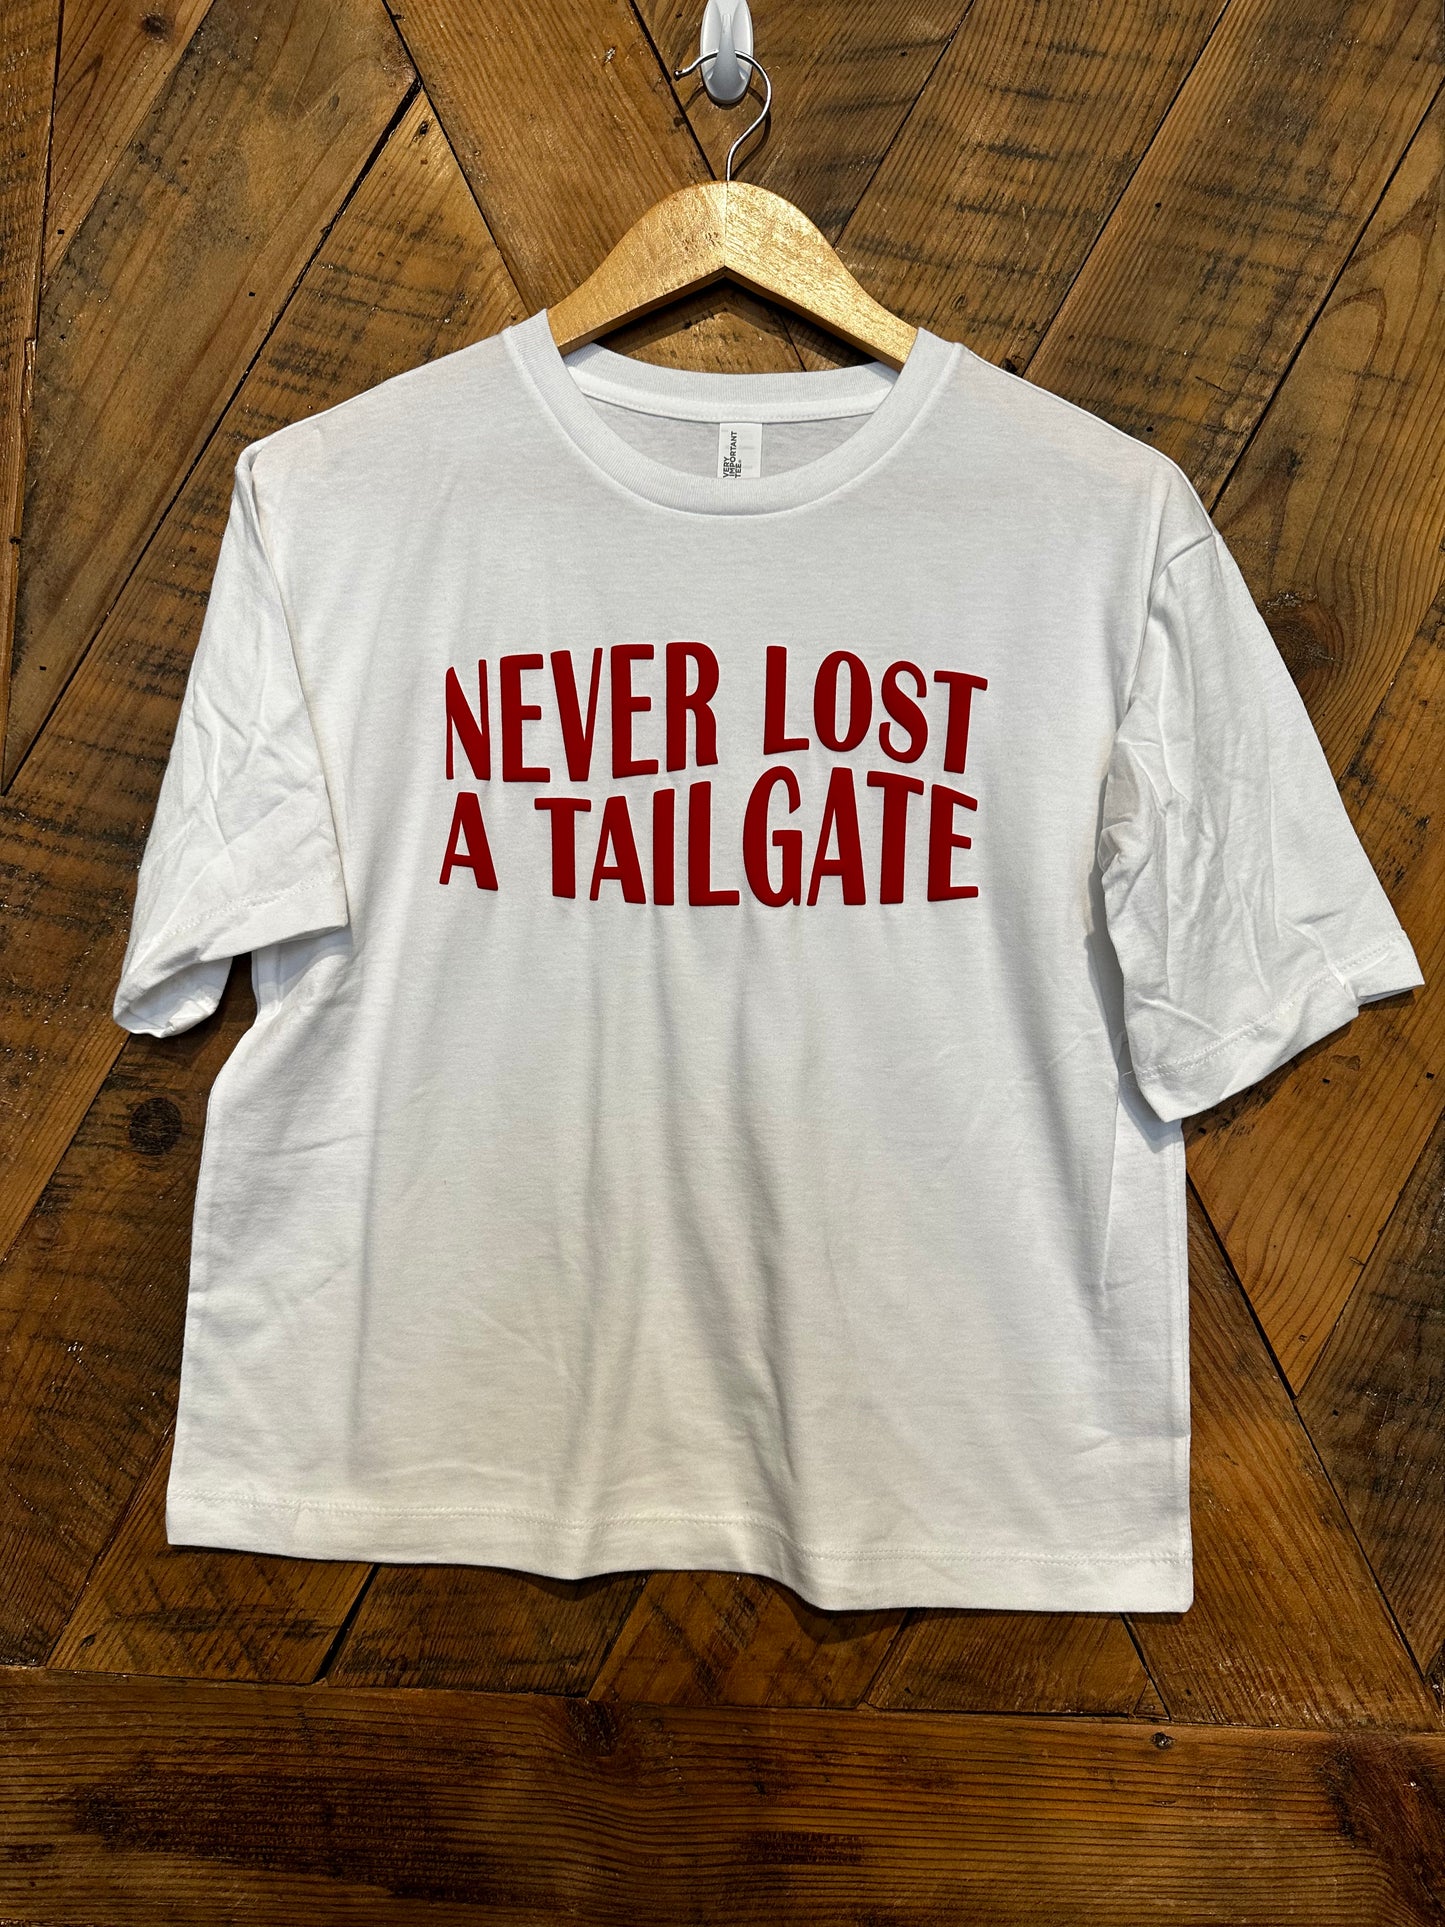 Never Lost a Tailgate T-shirt